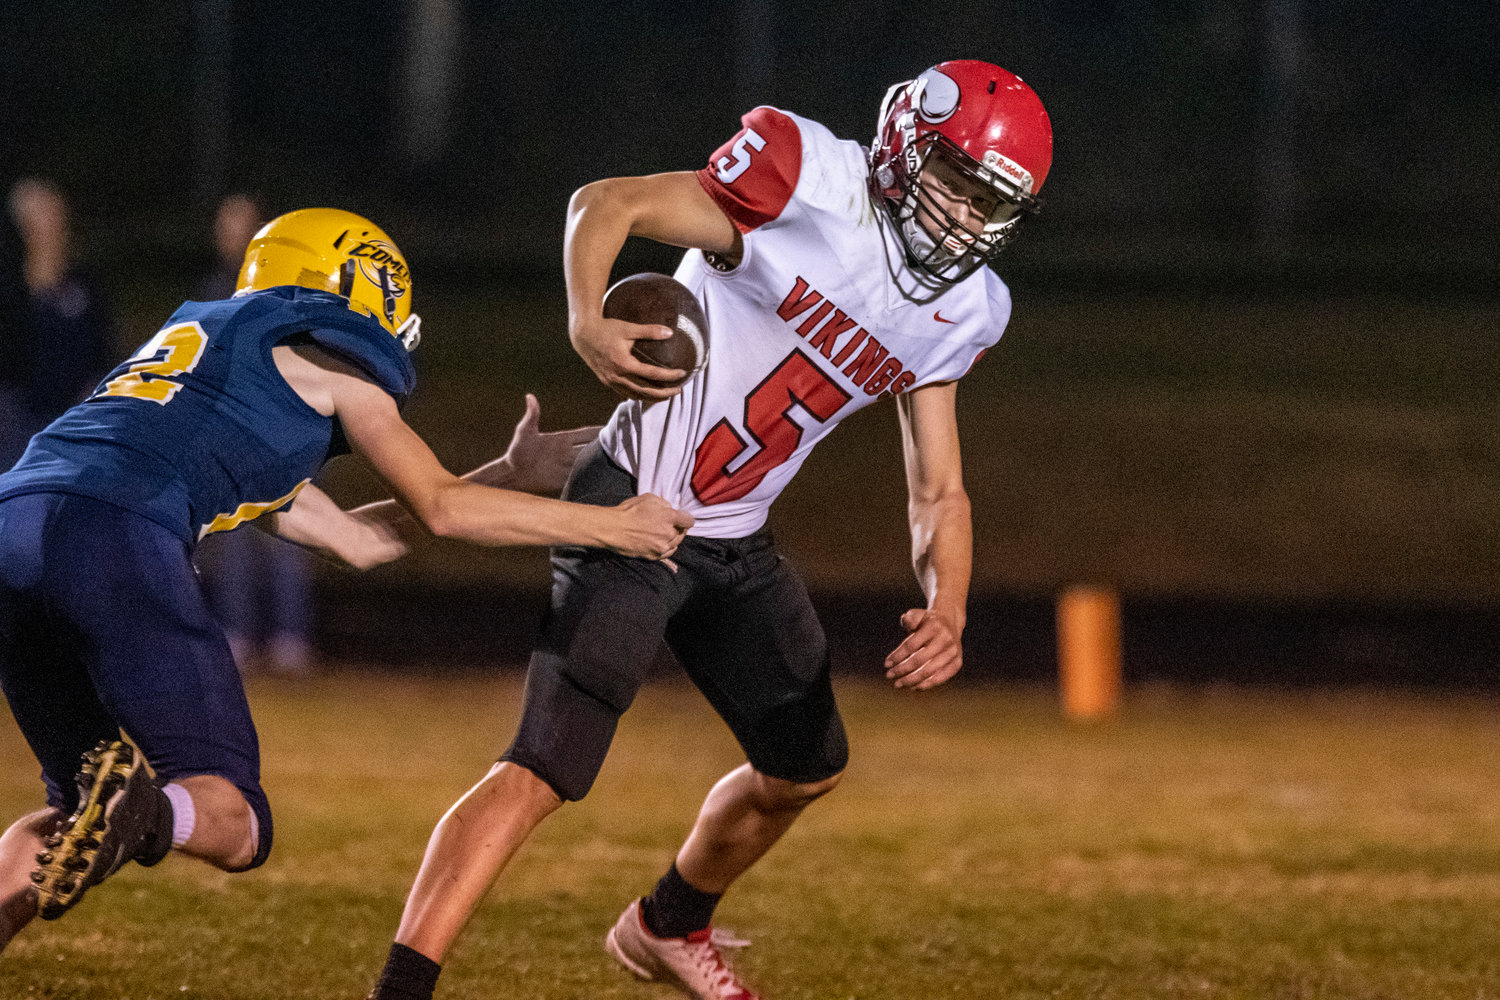 Mossyrock wideout Keegan Kolb (5) breaks a tackle before completing a 49-yard touchdown reception in the first quarter of a road game against Naselle on Oct. 14.